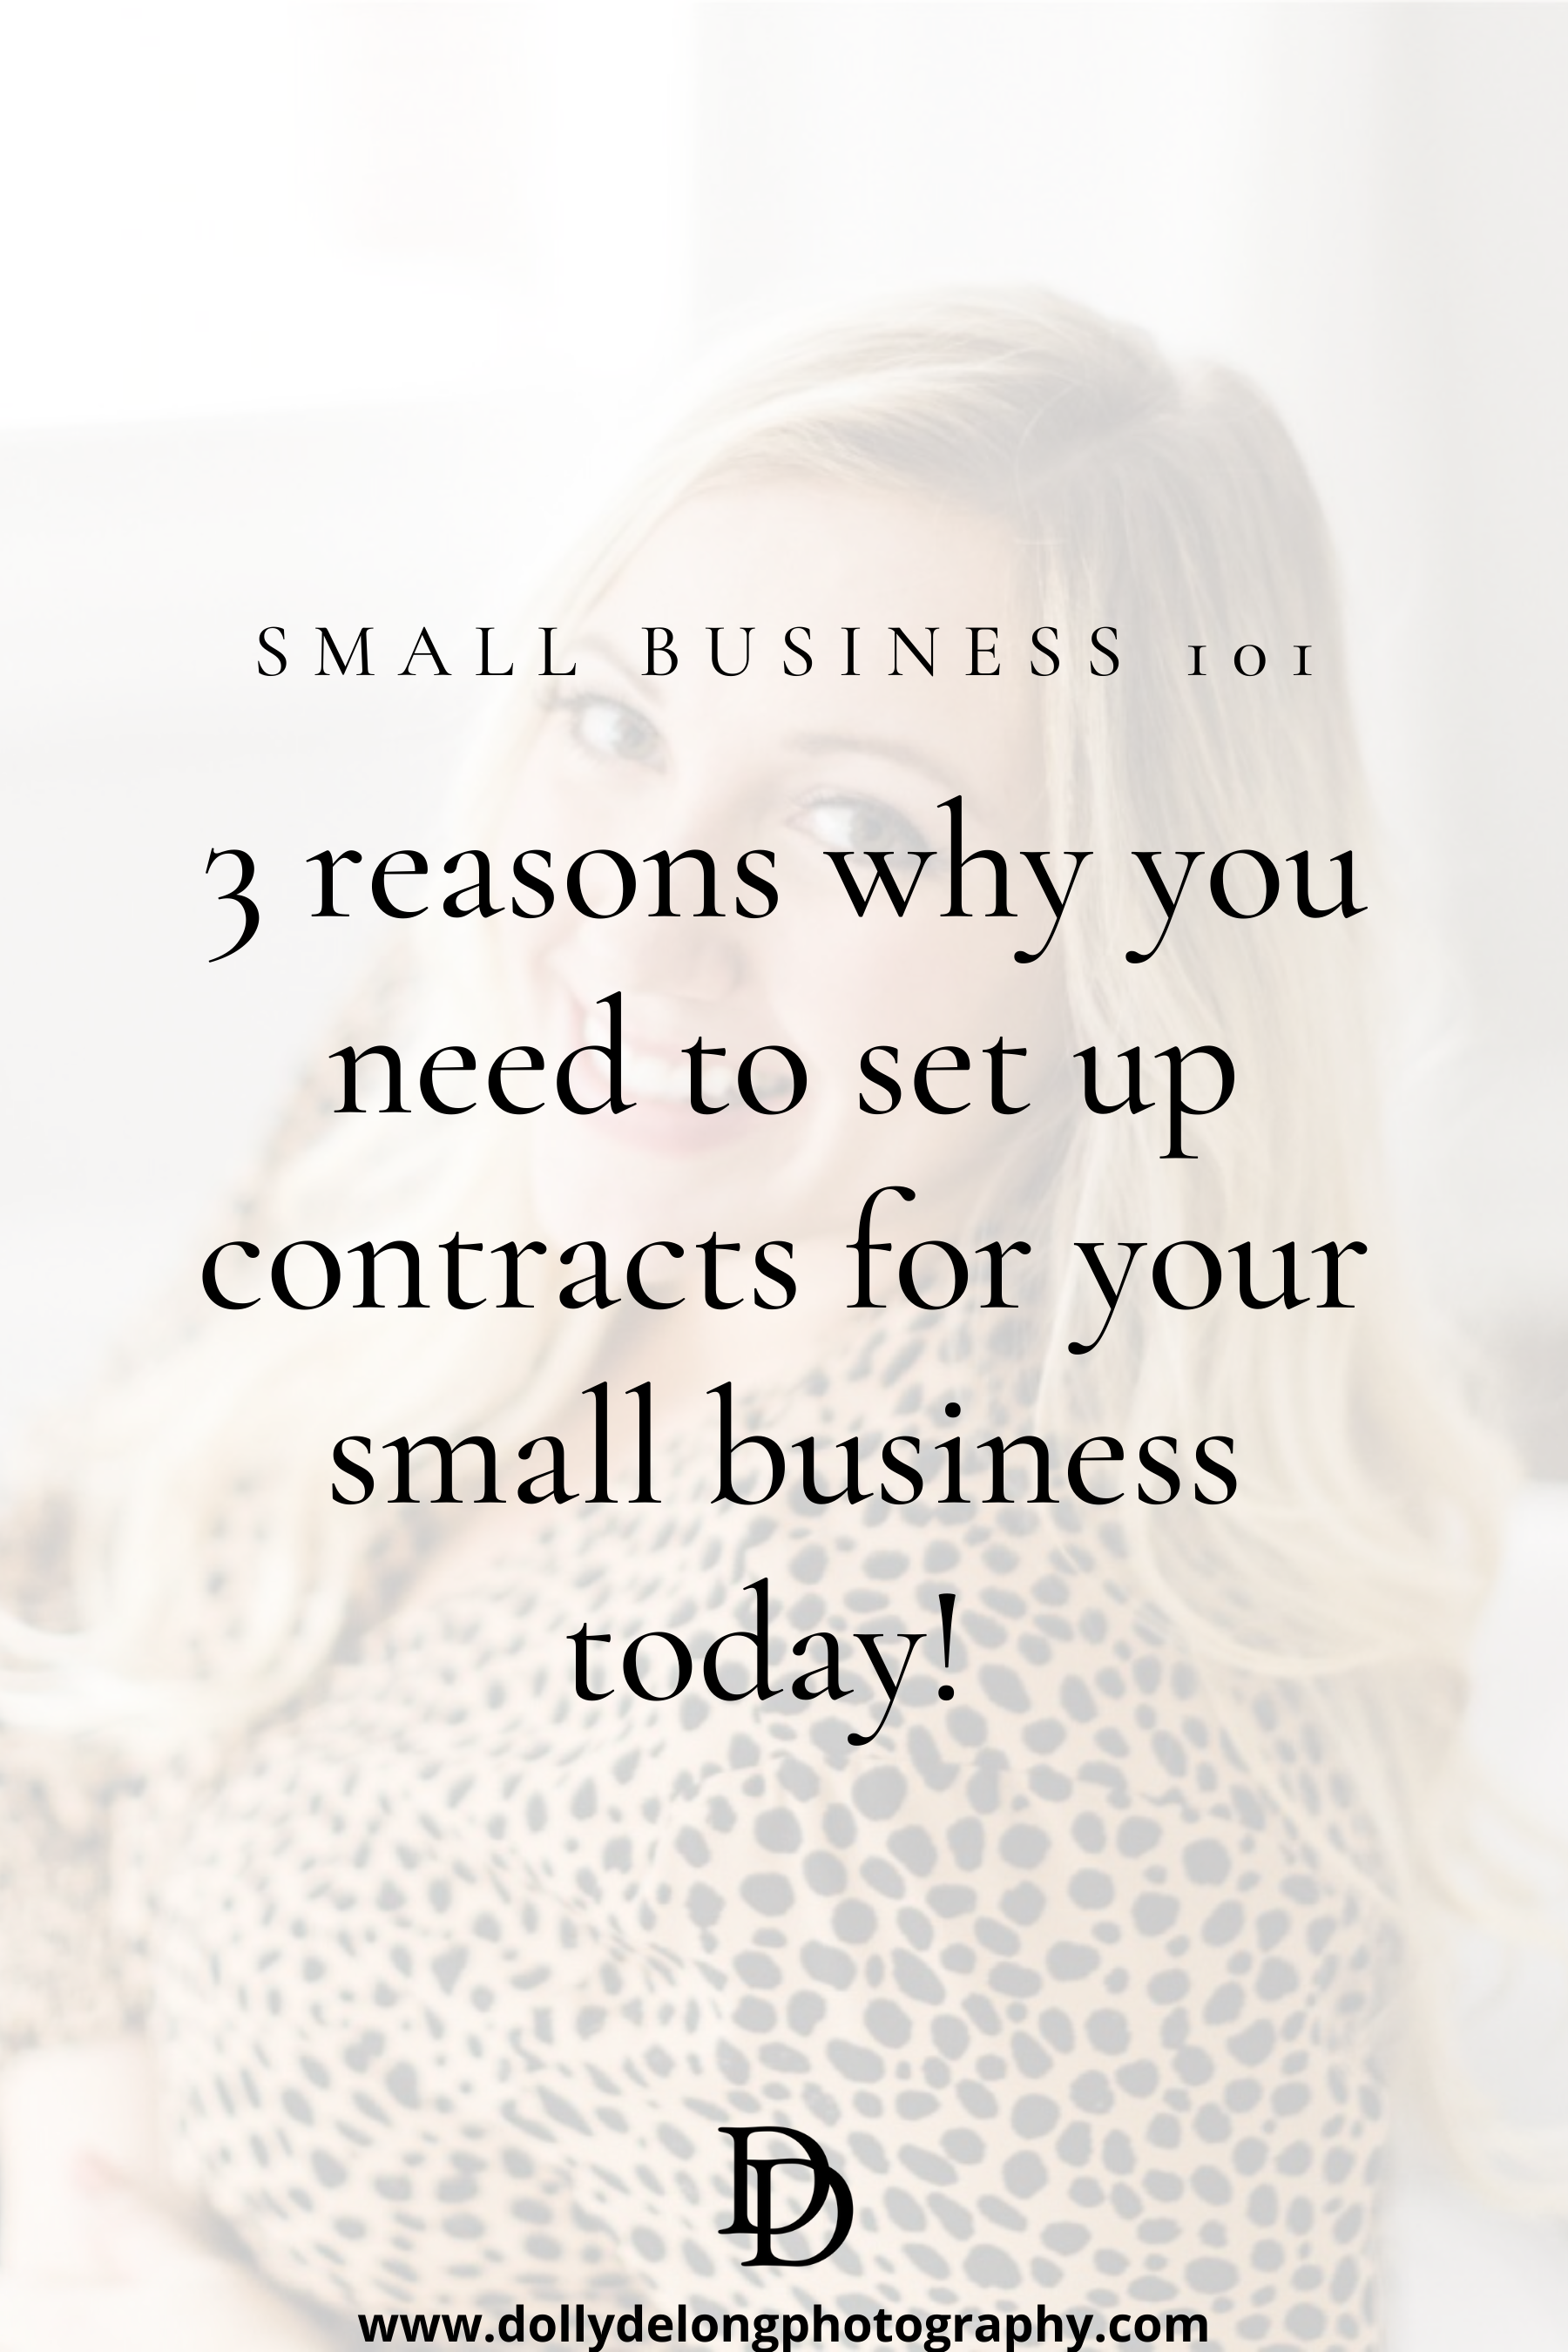 3 reasons why you need to set up contracts for your small business today!